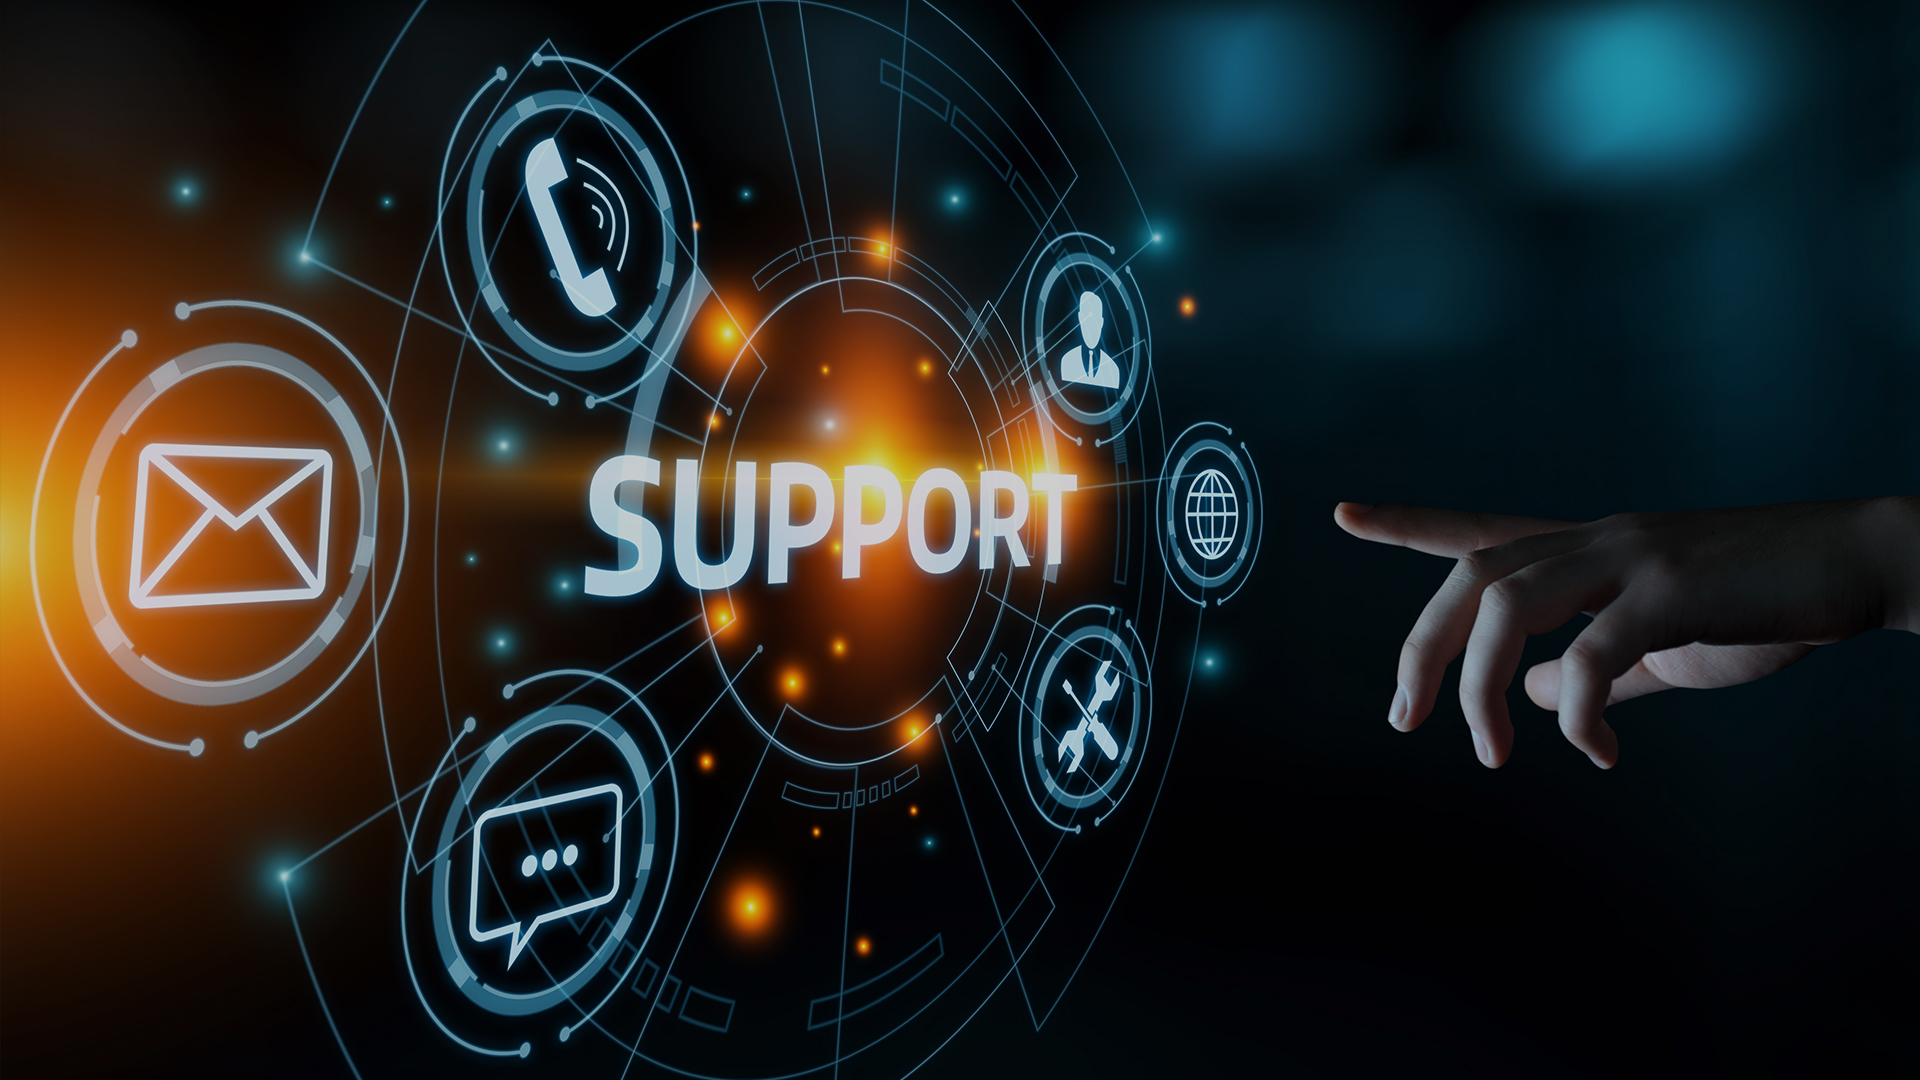 call center outsourcing | the word "support" floating in a holographic image with holographic icons around it while someone reaches out a finger to touch it